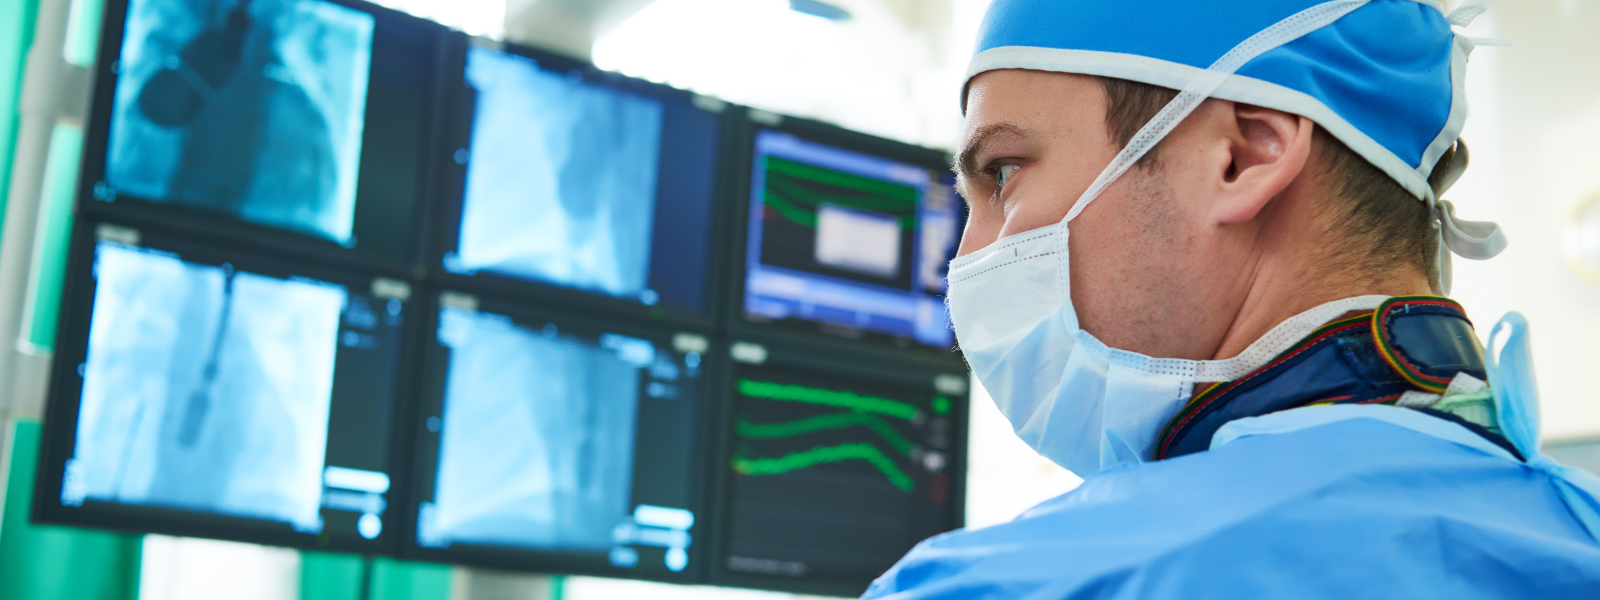 Injury-Proofing Your Work: Ergonomics in Interventional Radiology